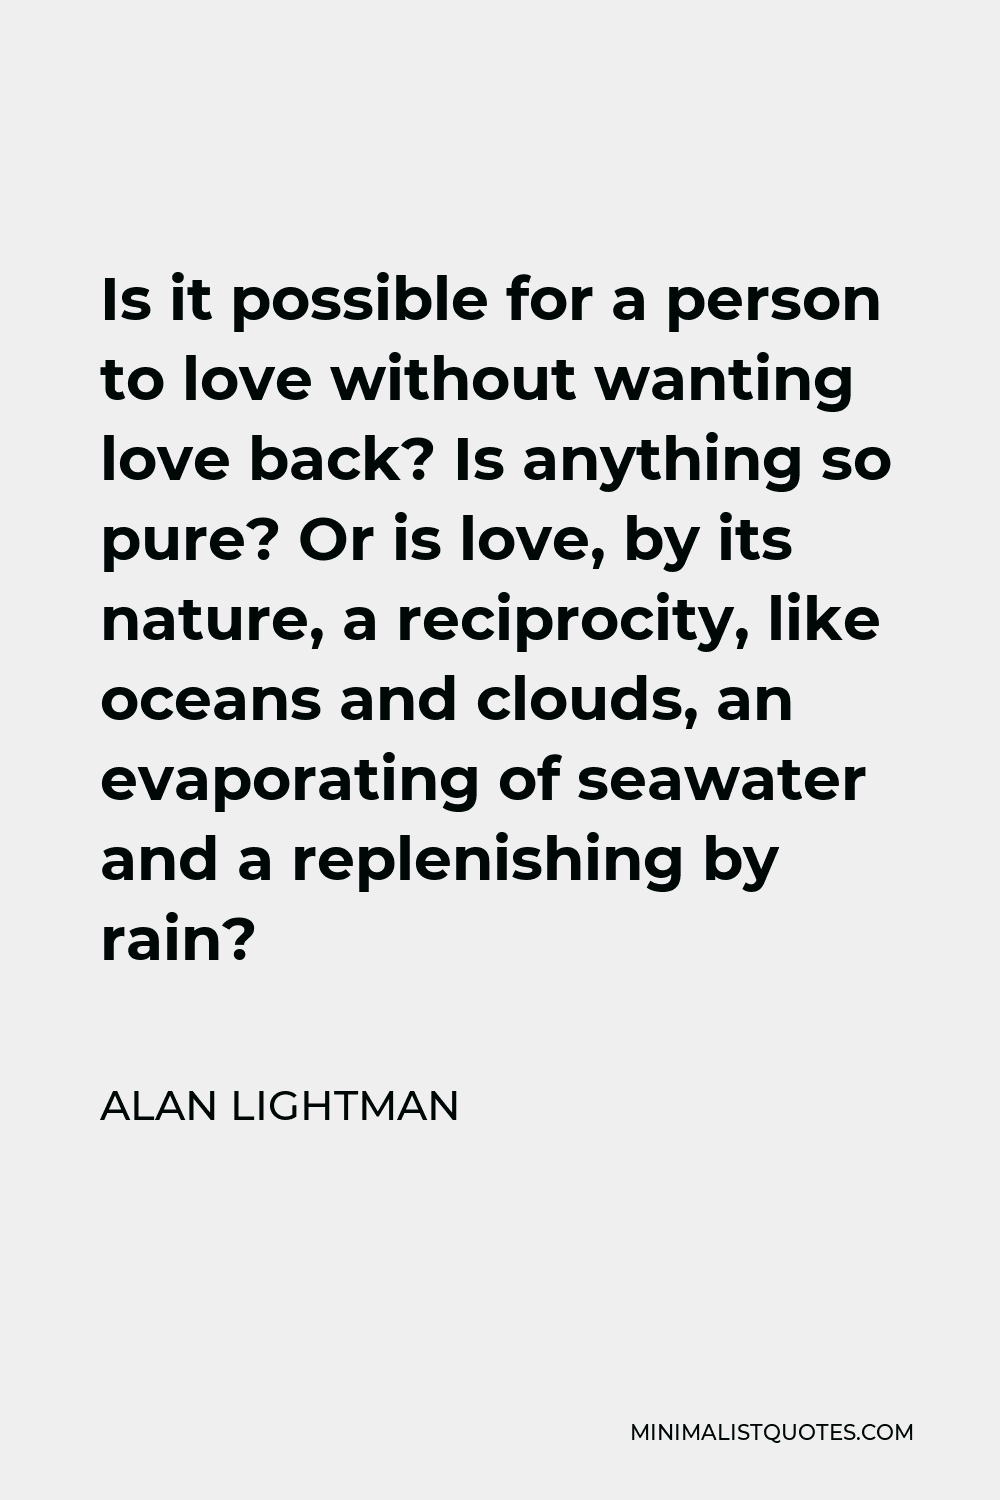 Alan Lightman Quote - Is it possible for a person to love without wanting love back? Is anything so pure? Or is love, by its nature, a reciprocity, like oceans and clouds, an evaporating of seawater and a replenishing by rain?